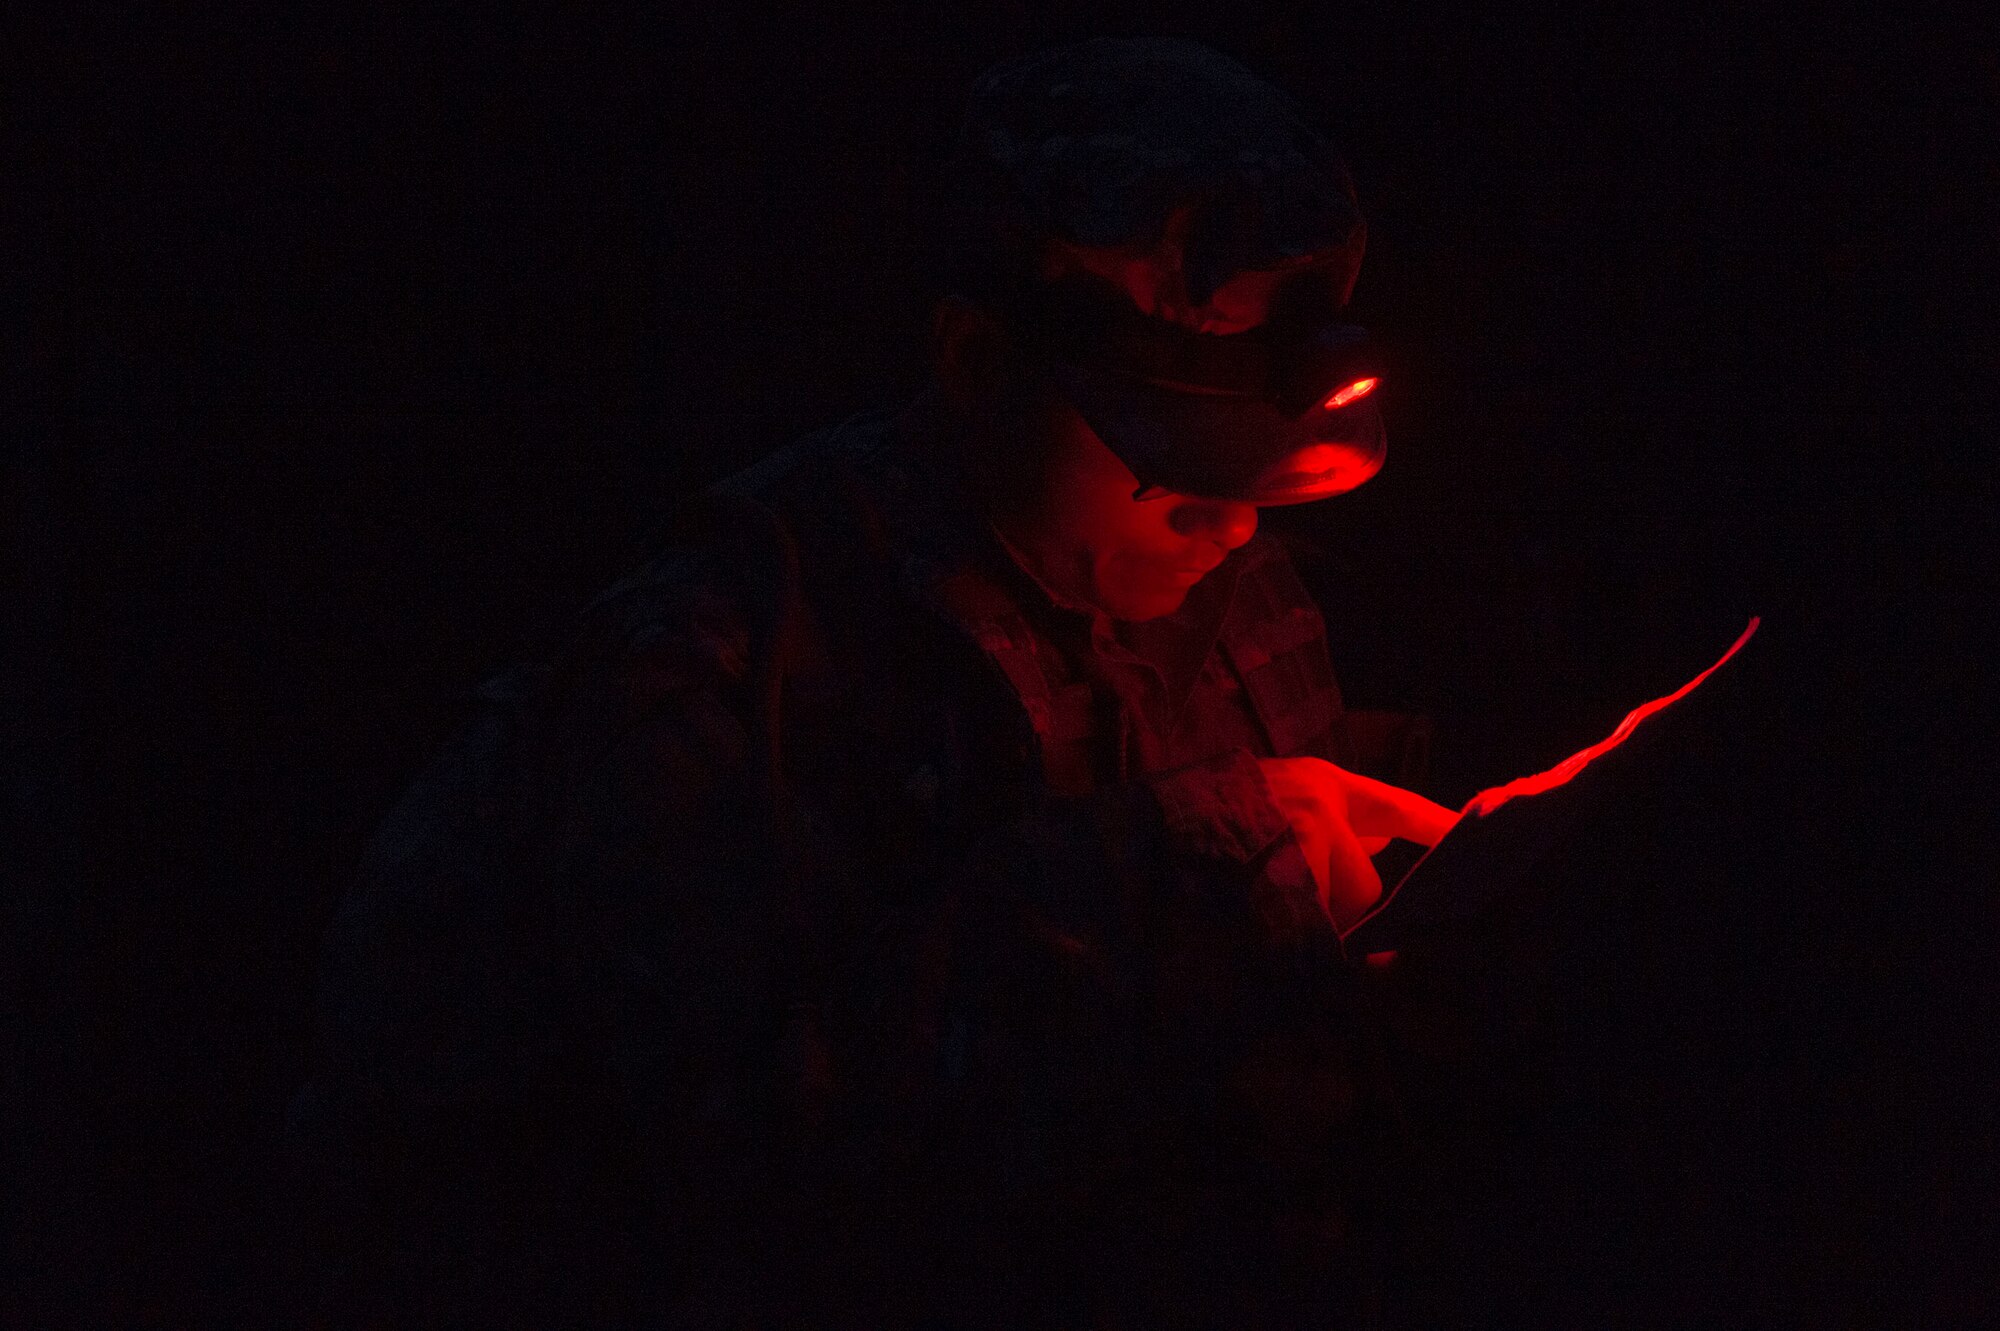 Tech. Sgt. Jose Obregon, 347th Operations Support Squadron independent duty medical technician, reviews coordinates during a land navigation assessment as part of a Pre-Ranger Assessment Course, Aug. 25, 2018, at Moody Air Force Base, Ga. Moody’s 93d Air Ground Operations Wing hosted the three-day assessment which challenged approximately 20 Airmen from the 93d AGOW and 23d Wing on their physical fitness, land navigation skills, leadership qualities, water confidence and academic and tactical abilities under duress. The evaluation is designed to determine whether Airmen are ready to attend the Air Force Ranger Assessment Course held at Fort Bliss, Texas. (U.S. Air Force photo by Senior Airman Greg Nash)